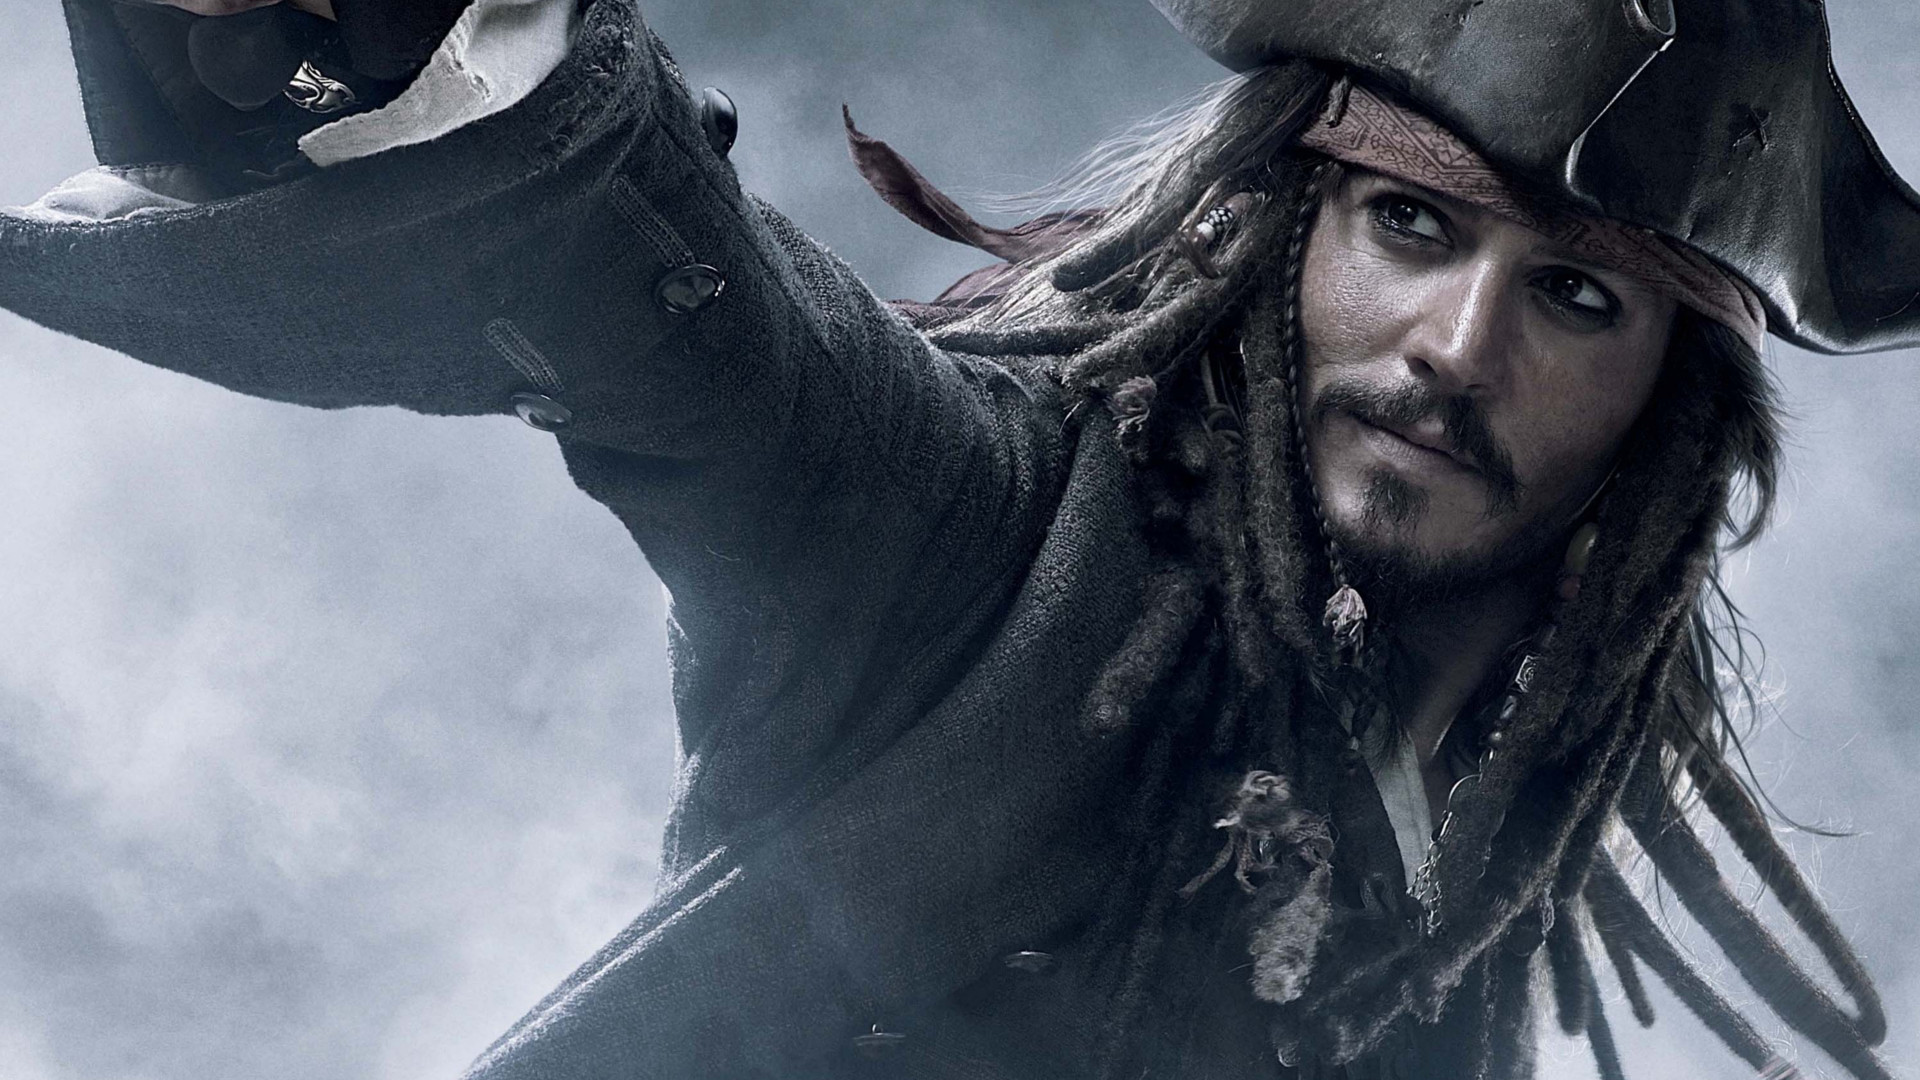 jack sparrow, pirates of the caribbean, movie, pirates of the caribbean: at world's end, johnny depp Full HD